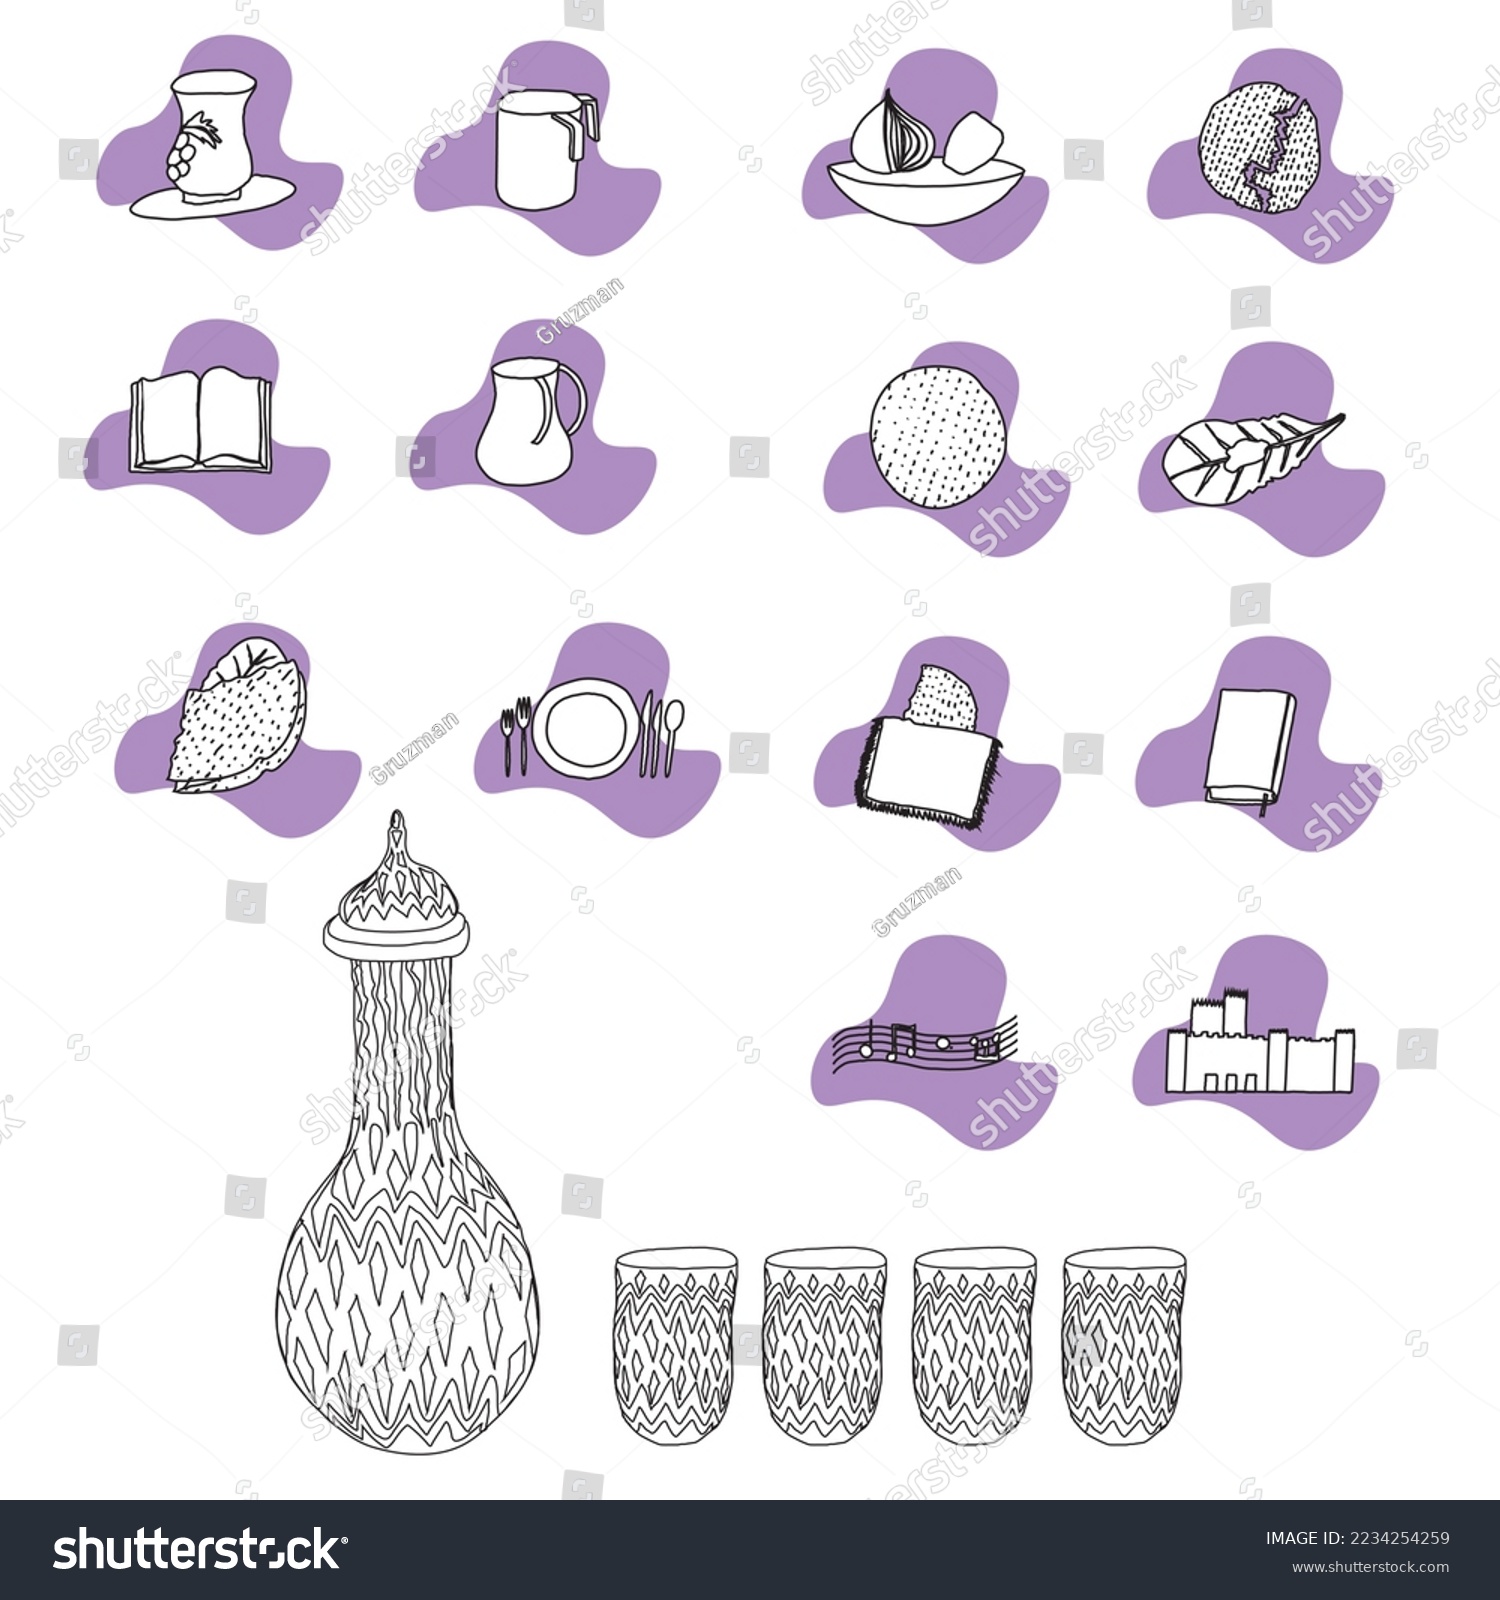 stock-vector-vector-icon-set-steps-of-seder-pesach-the-jewish-holiday-of-freedom-a-crystal-win...jpg